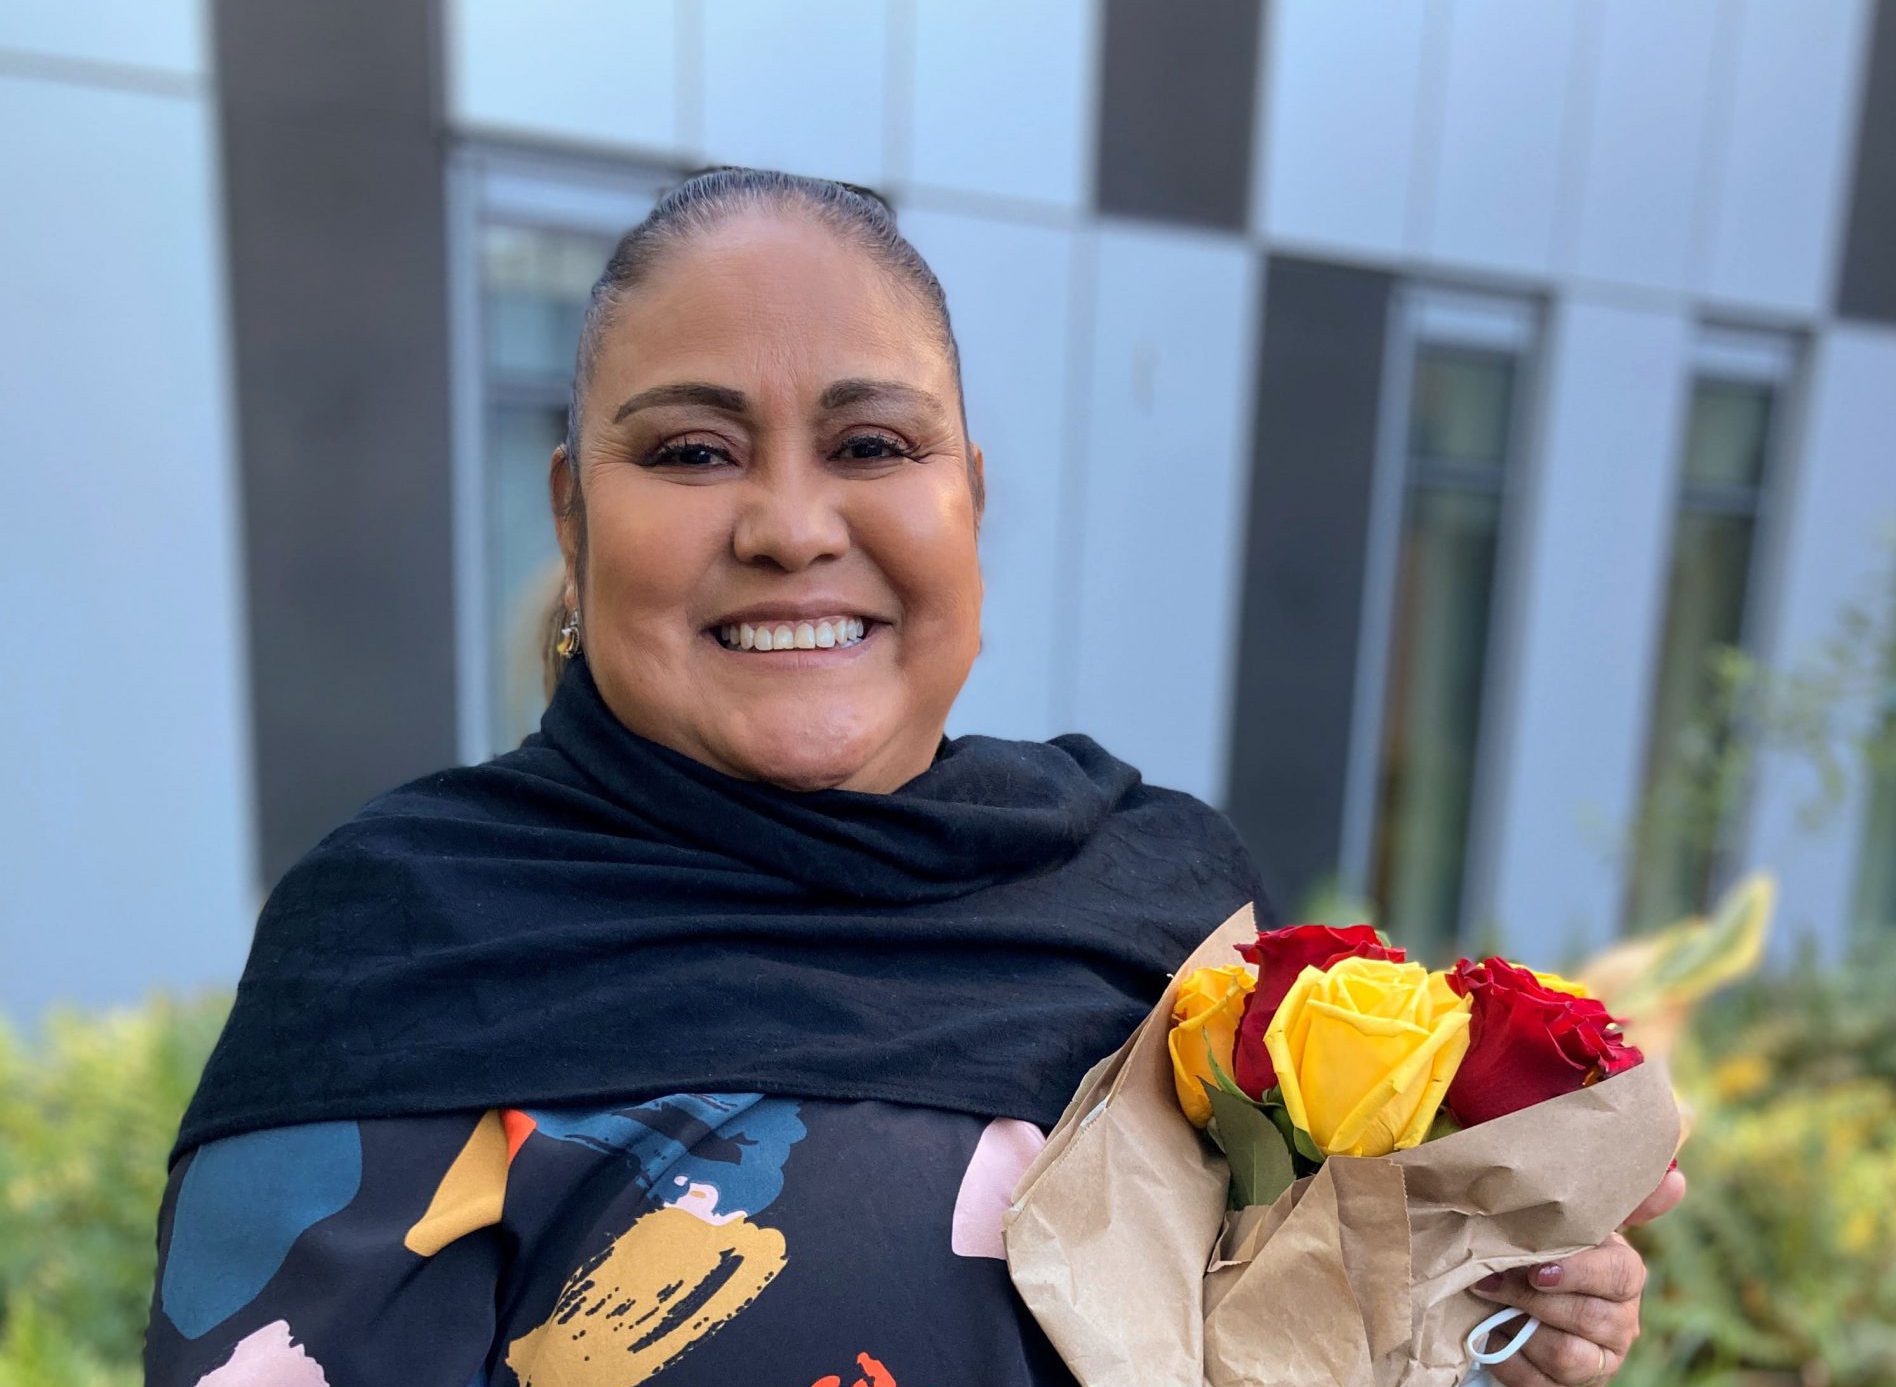 Hilda Martinez stands with roses at her send-off event for the Rose Parade